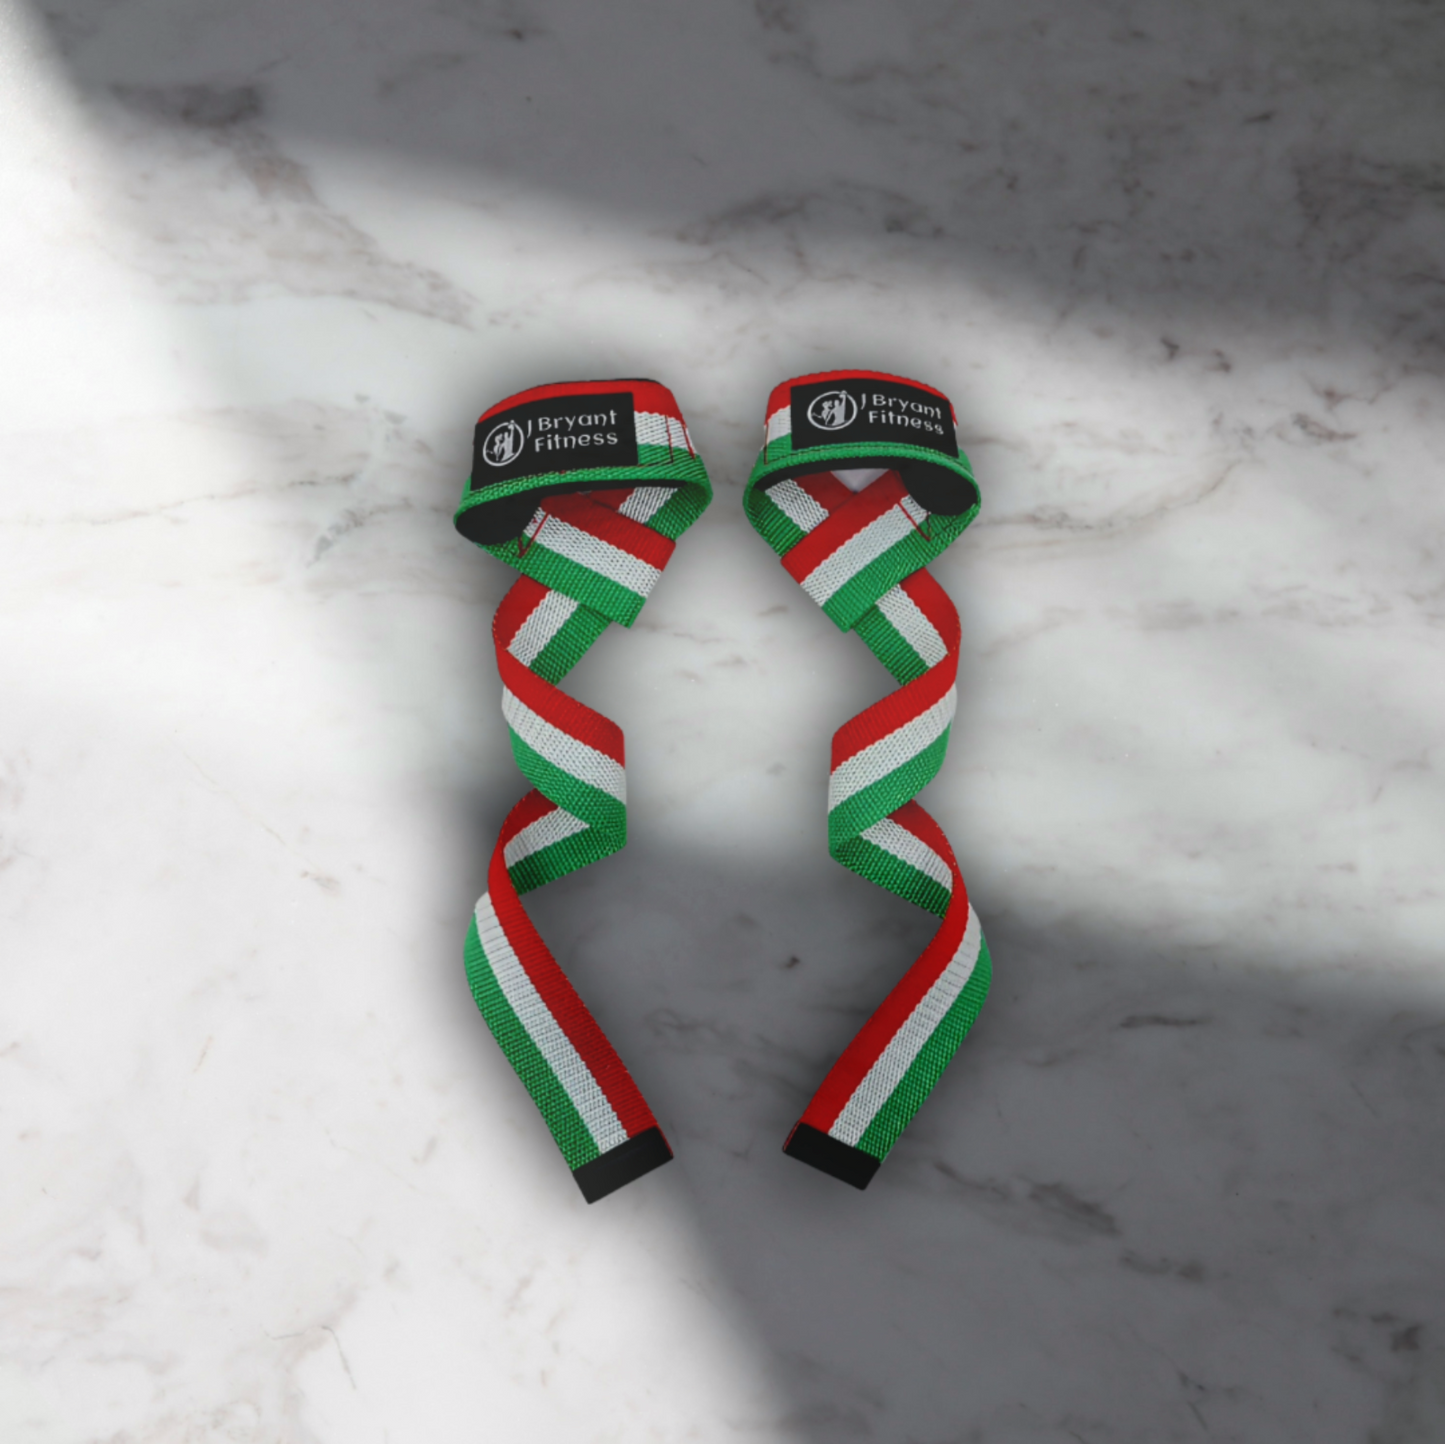 Red Reps red white green Christmas colors neoprene padded Lasso Weightlifting straps for bodybuilding, powerlifting, heavy deadlifting and grip support - 1 pair